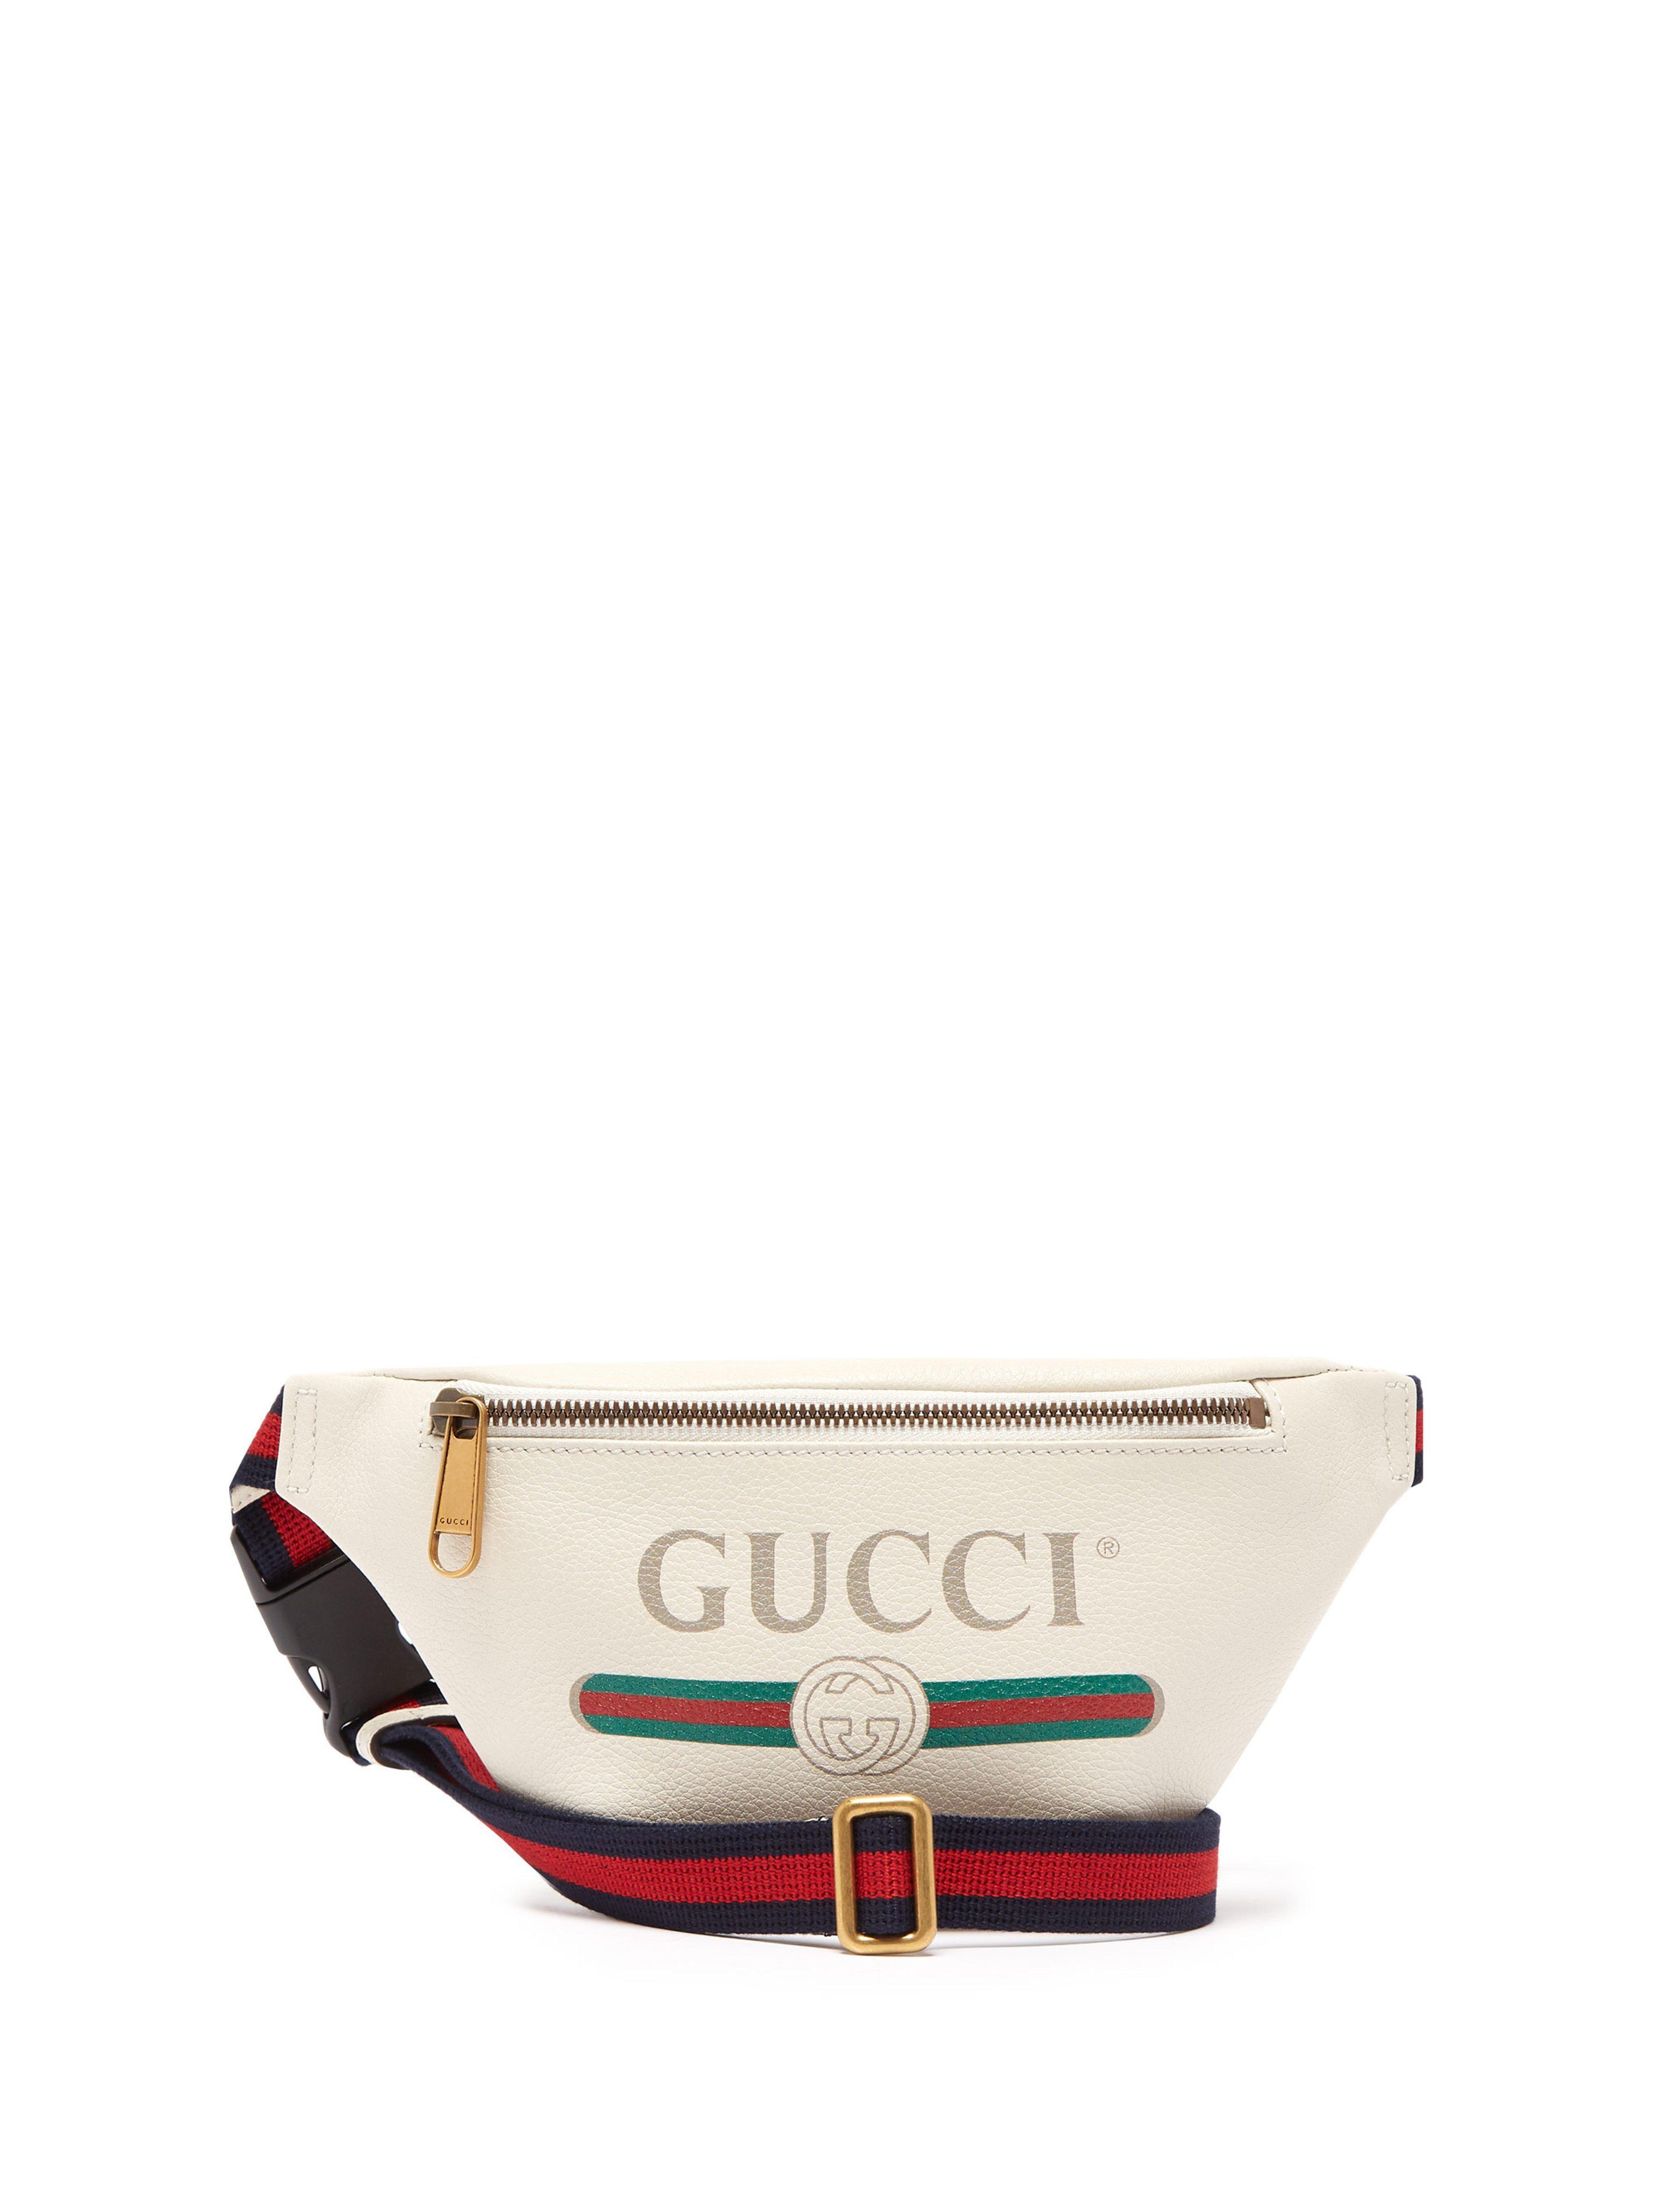 Gucci Small Logo - Gucci Small Logo Print Leather Belt Bag in White for Men - Lyst